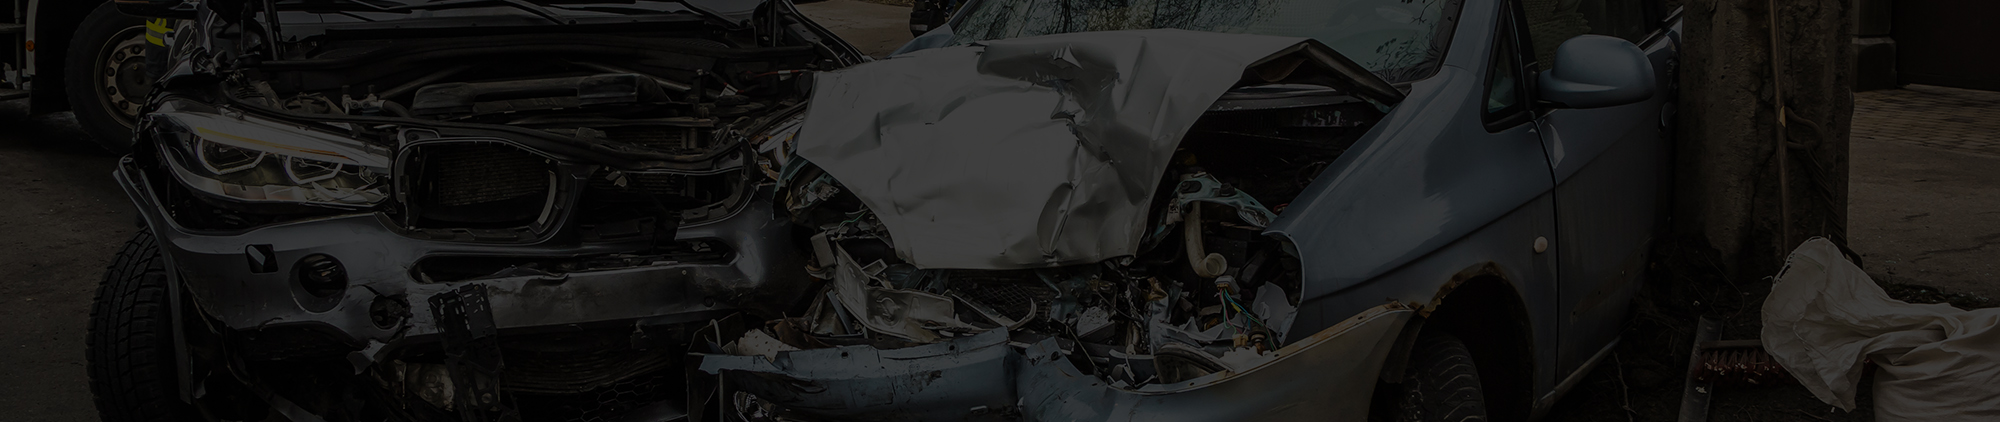 Car accident injuries insurance claim